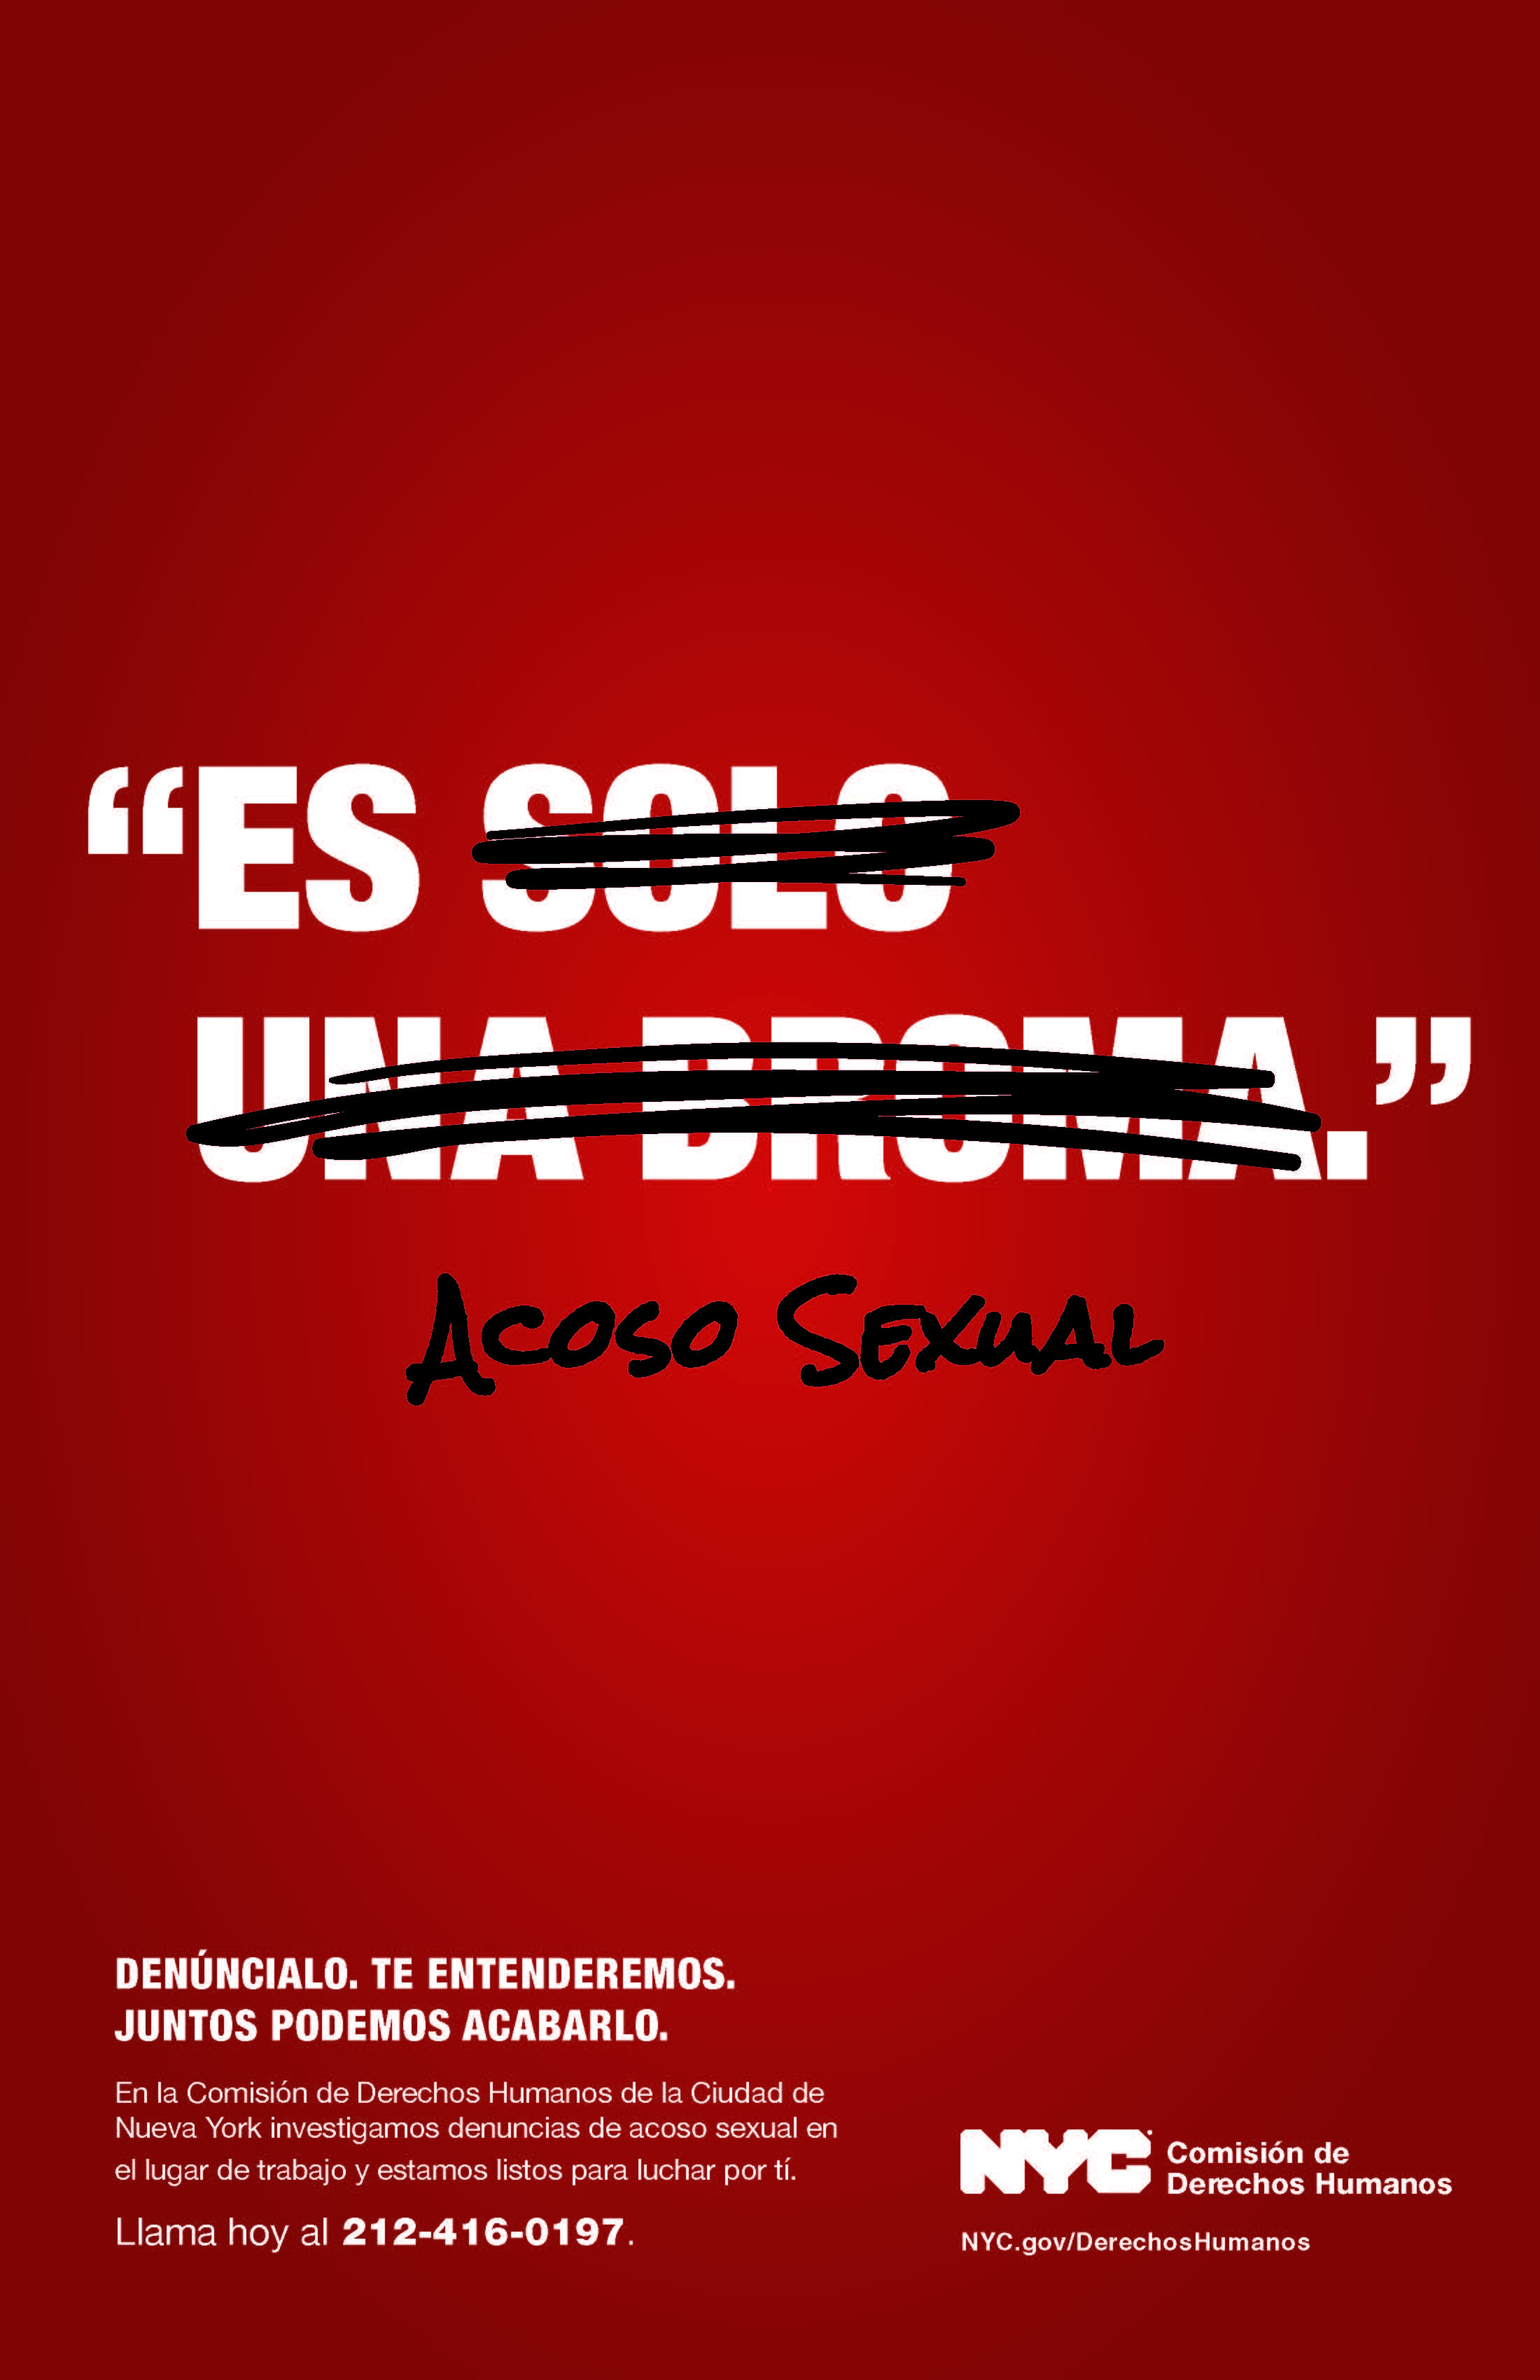 Text reading es acoso sexual with solo una broma crossed out